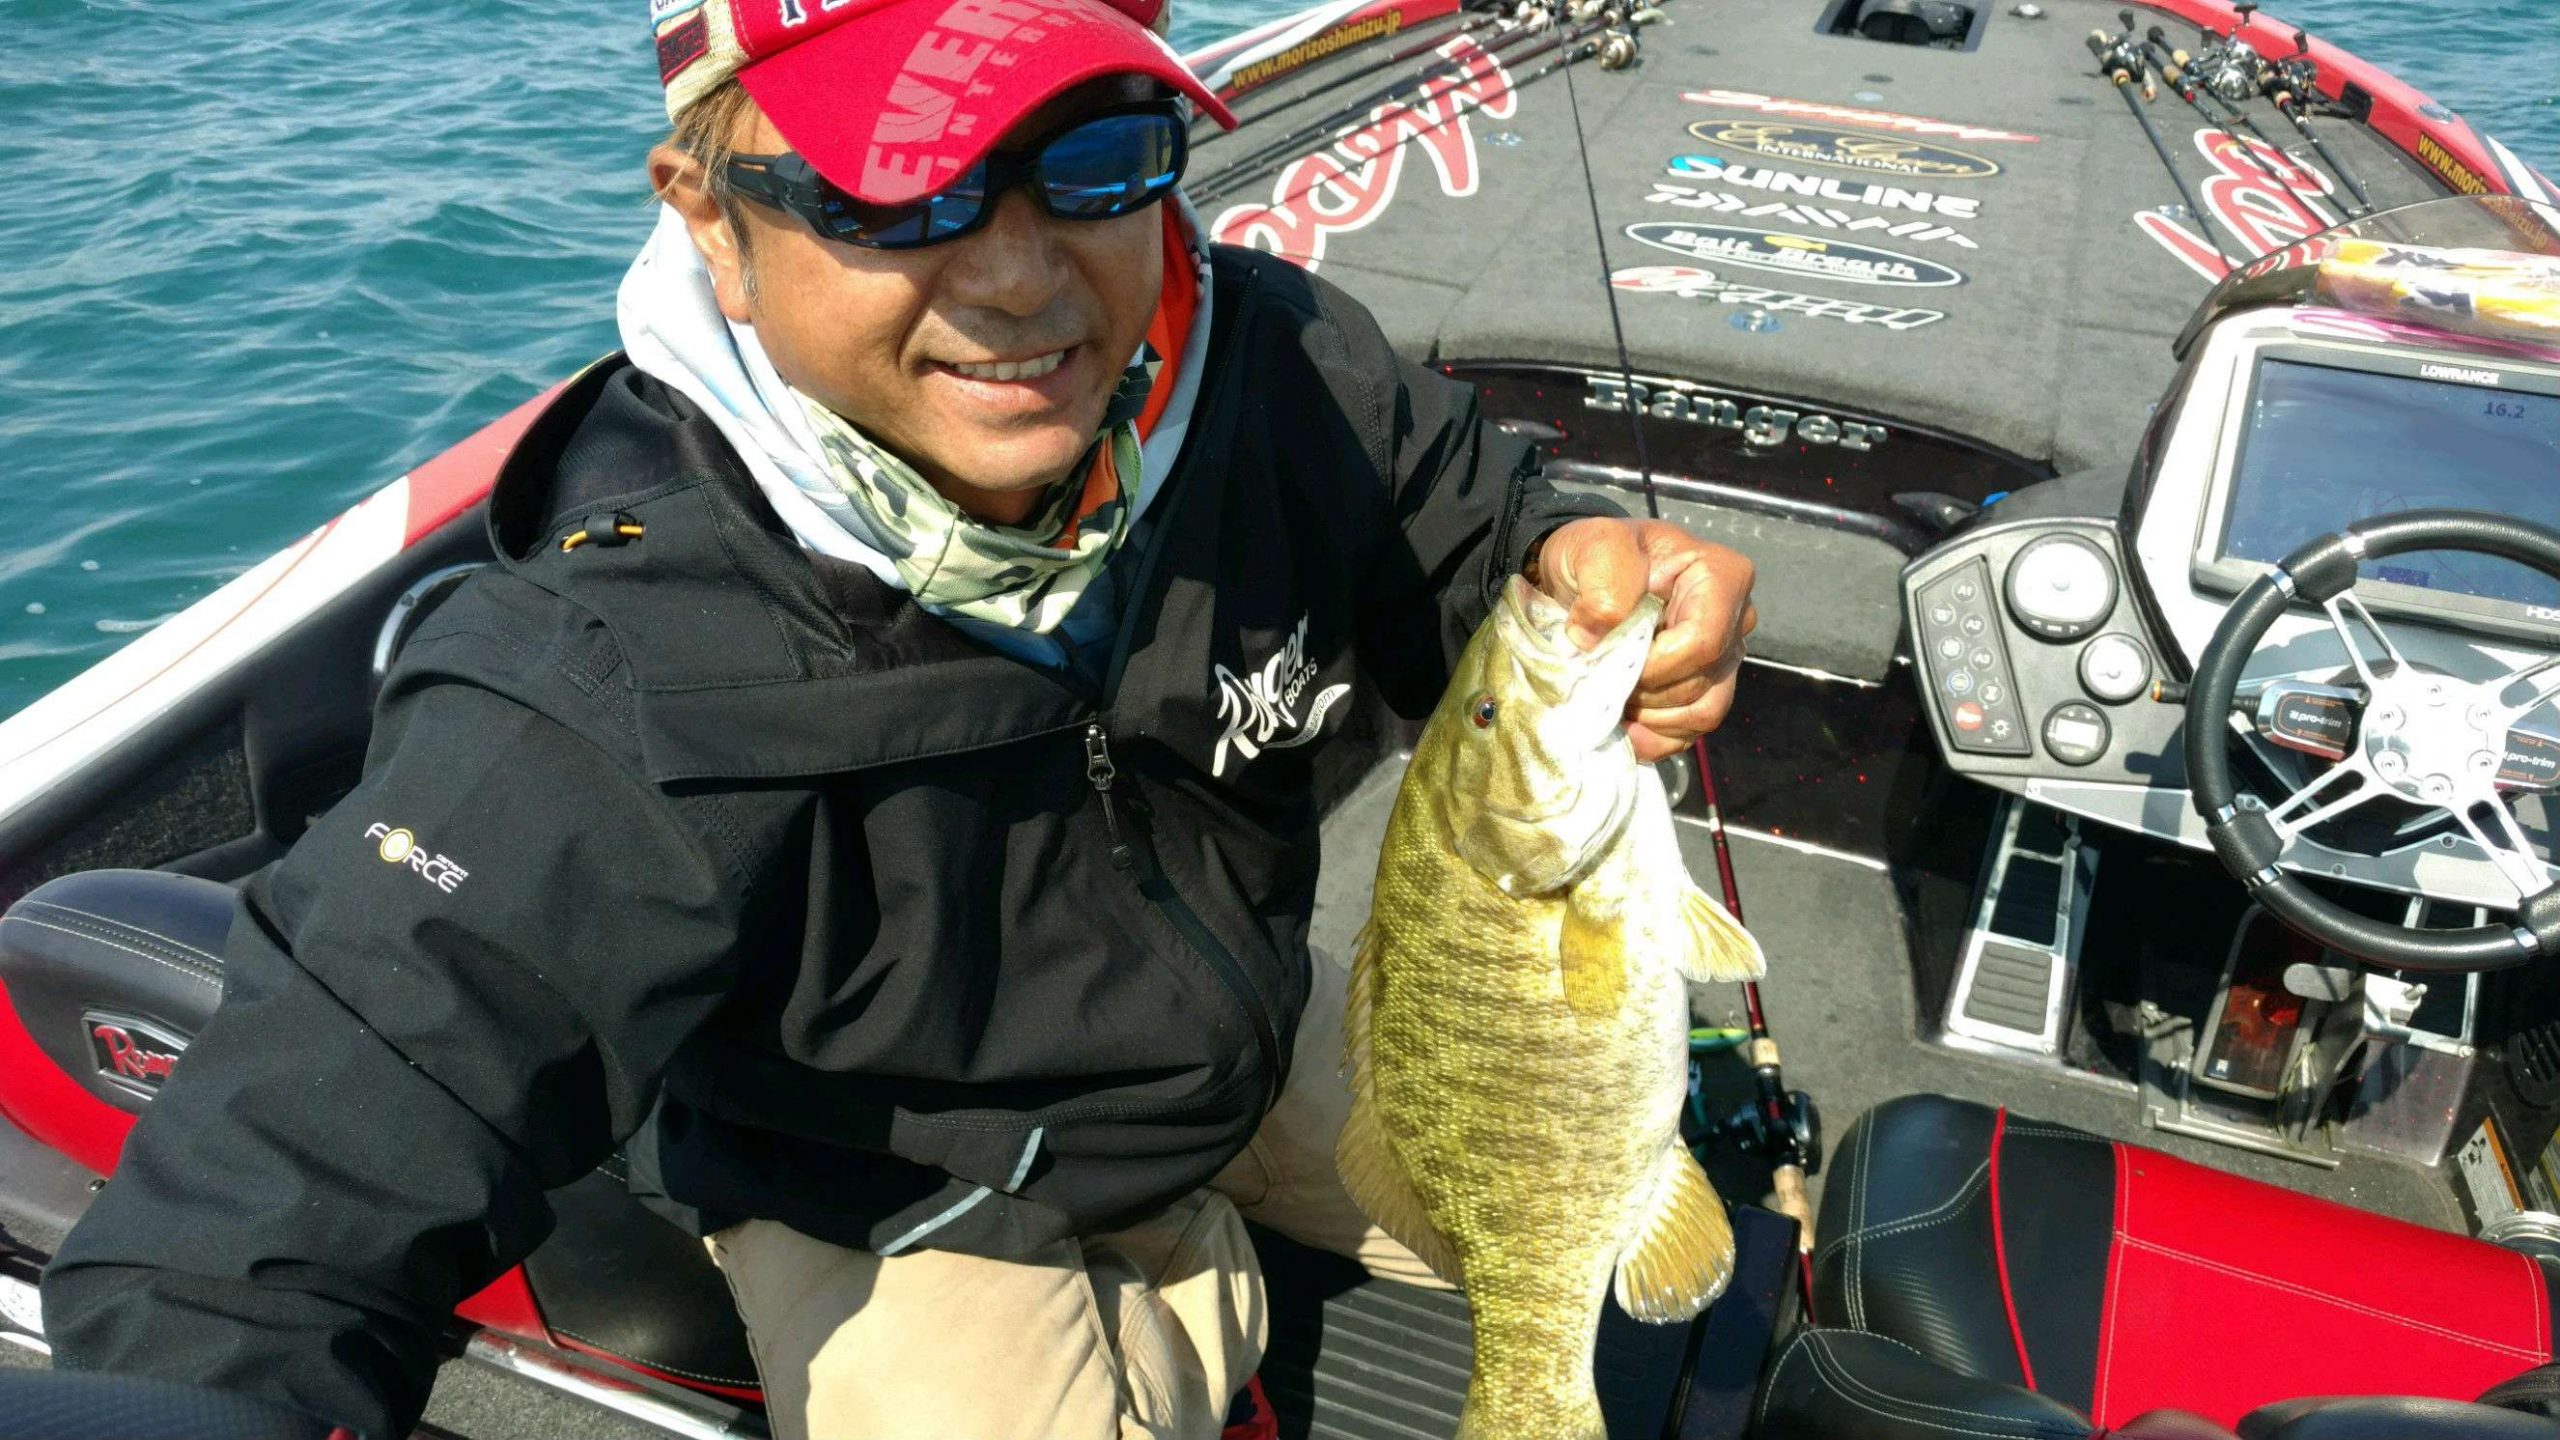 After catching this one, Morizo sets another small one free.